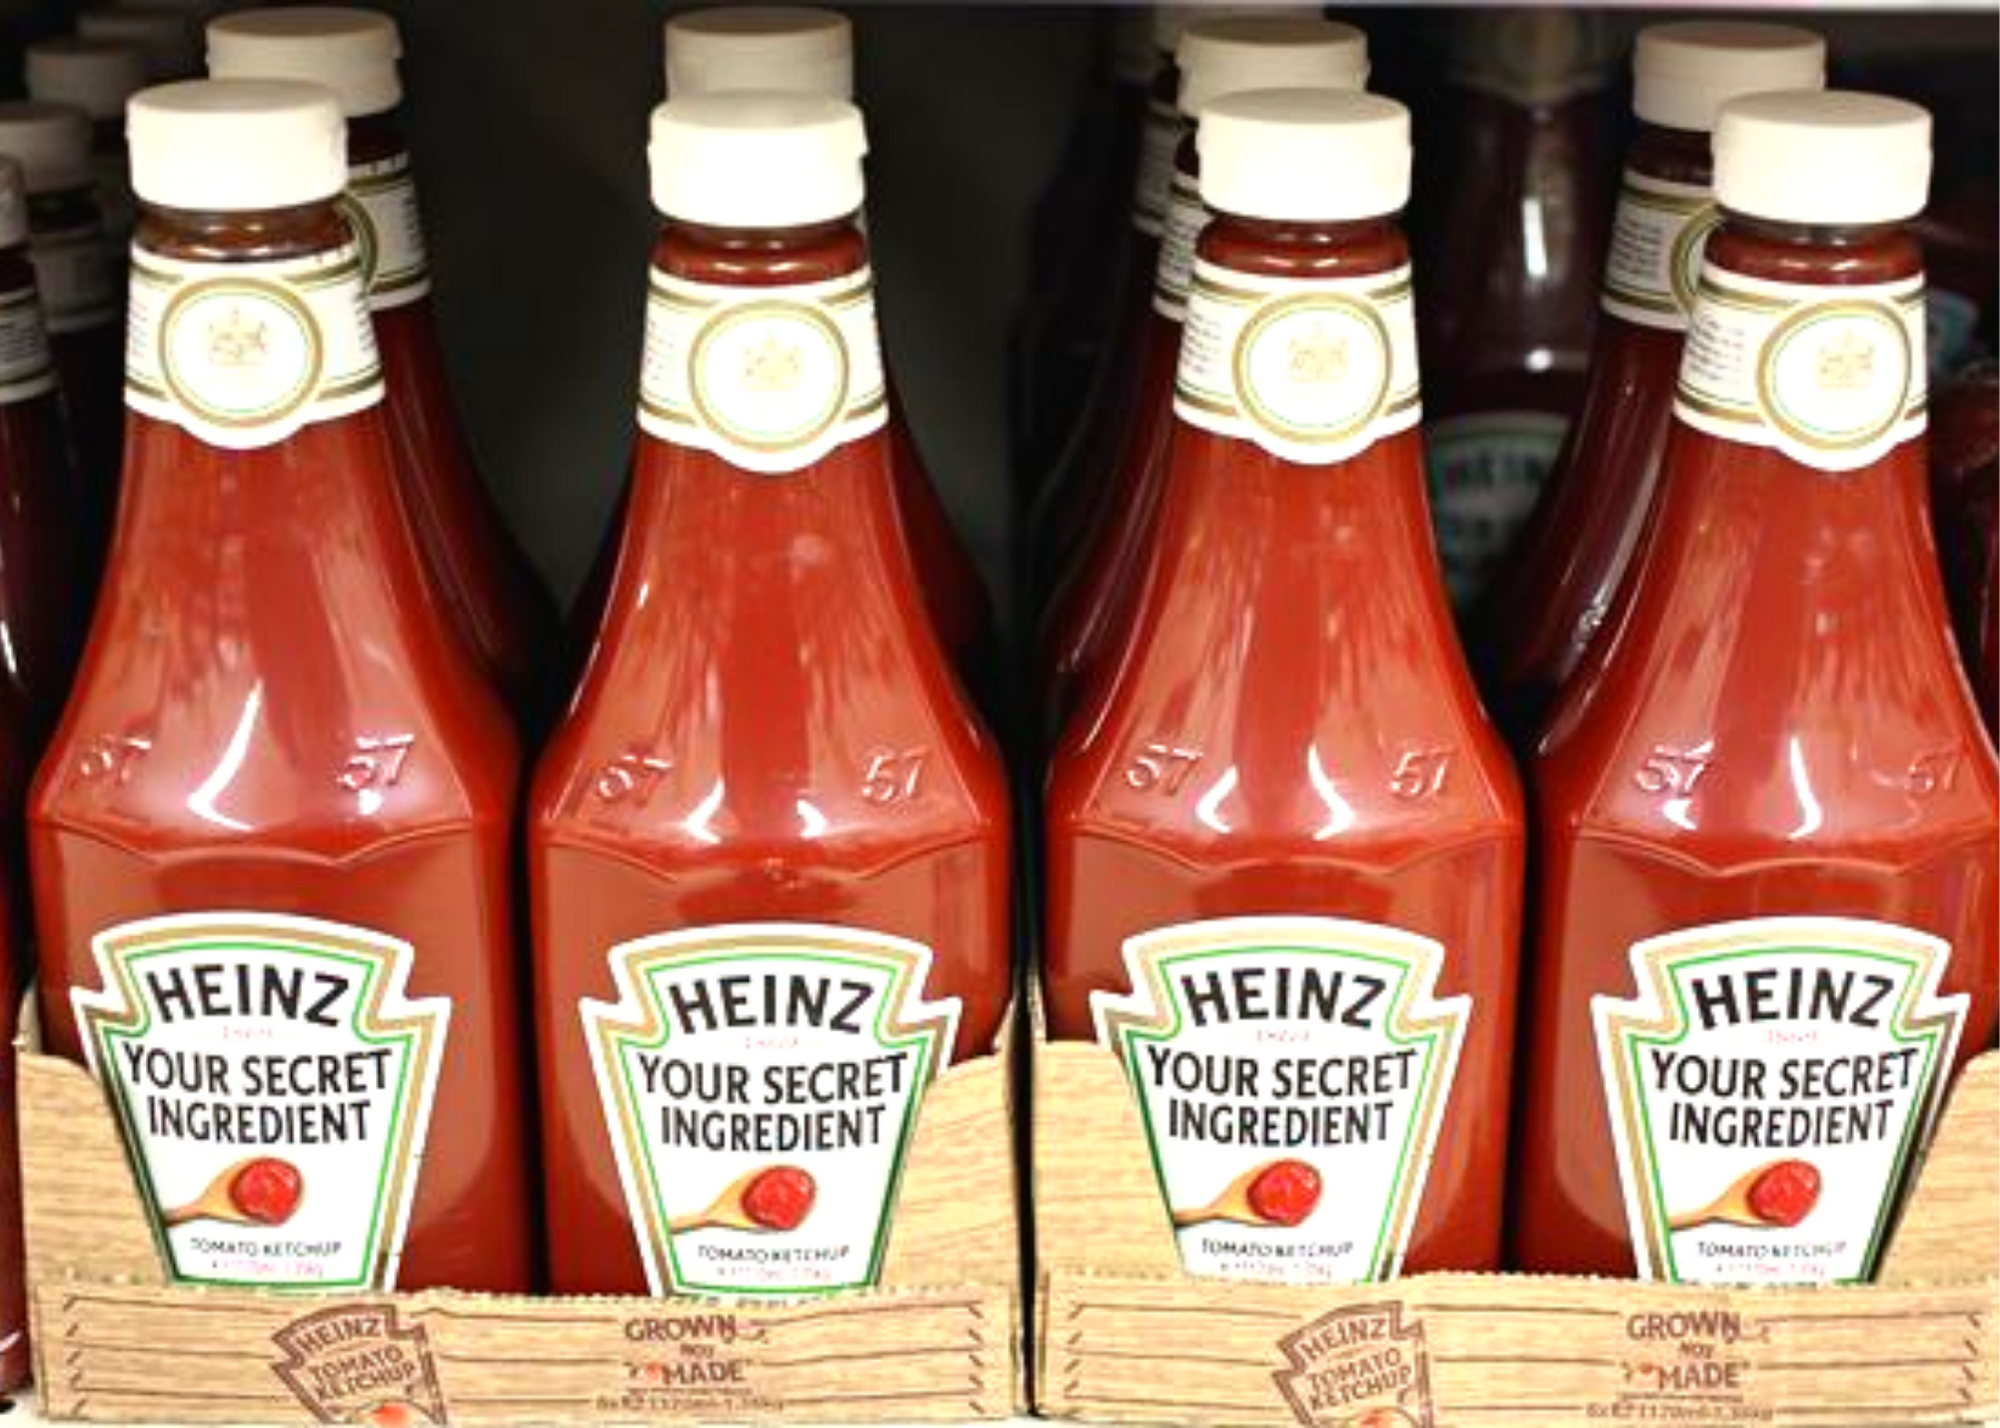 Heinz Ketchup Must Reapply As New Monarch King Charles III Ascends